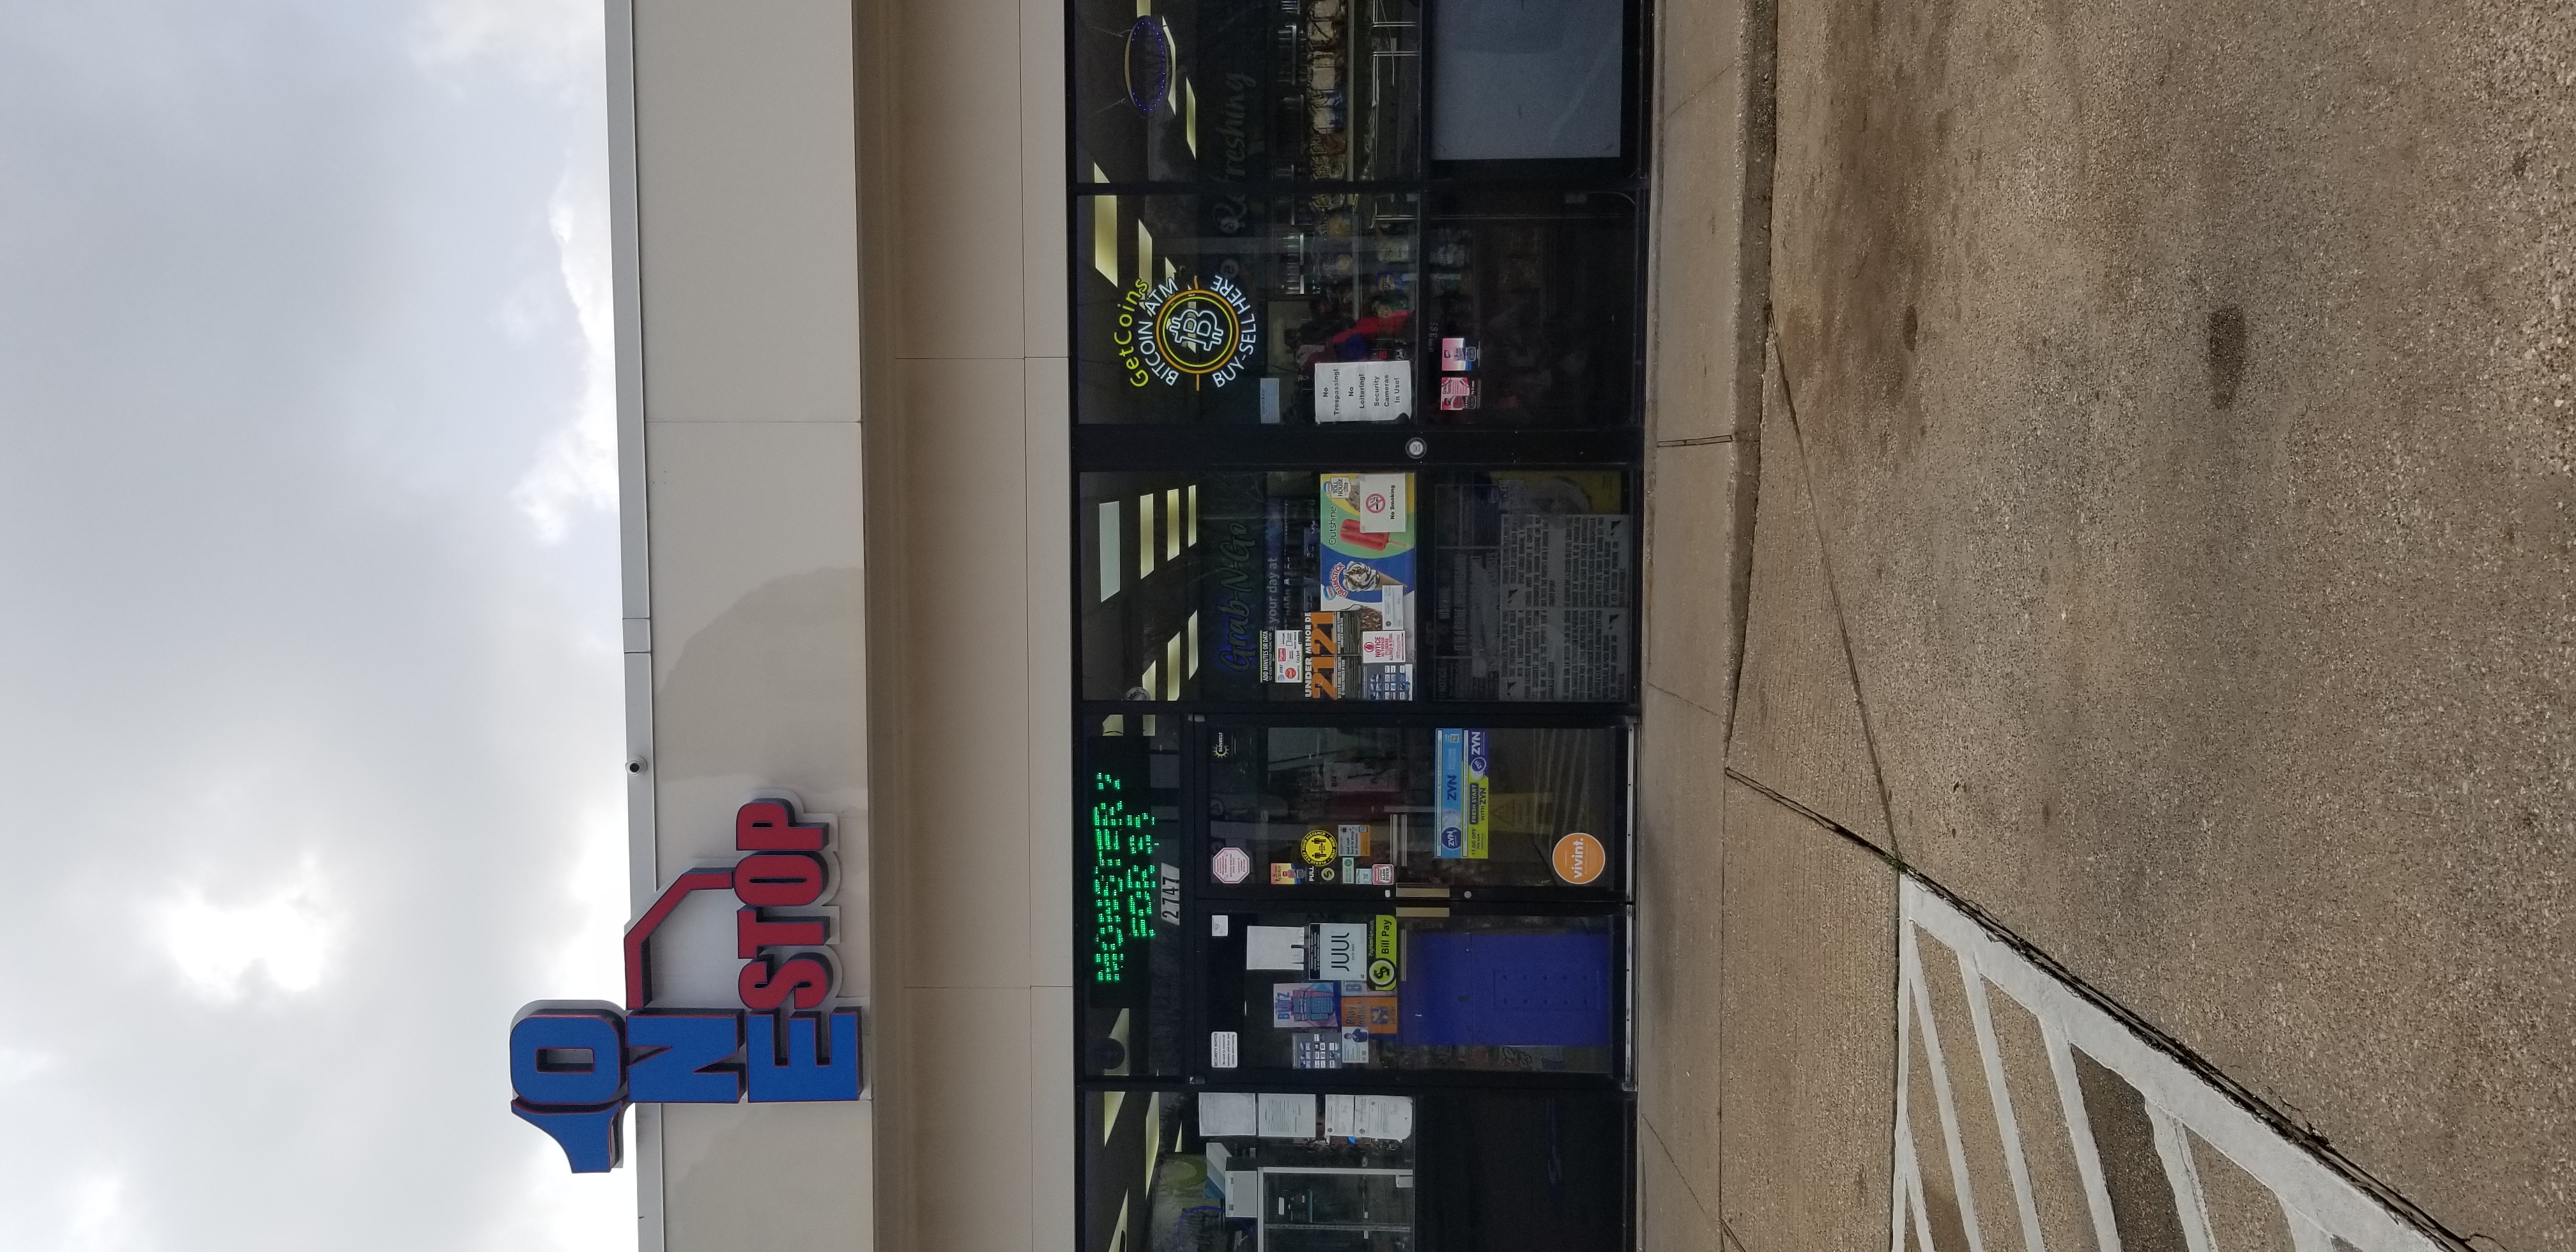 Getcoins - Bitcoin ATM - Inside of 1 Stop #8 in Houston, Texas